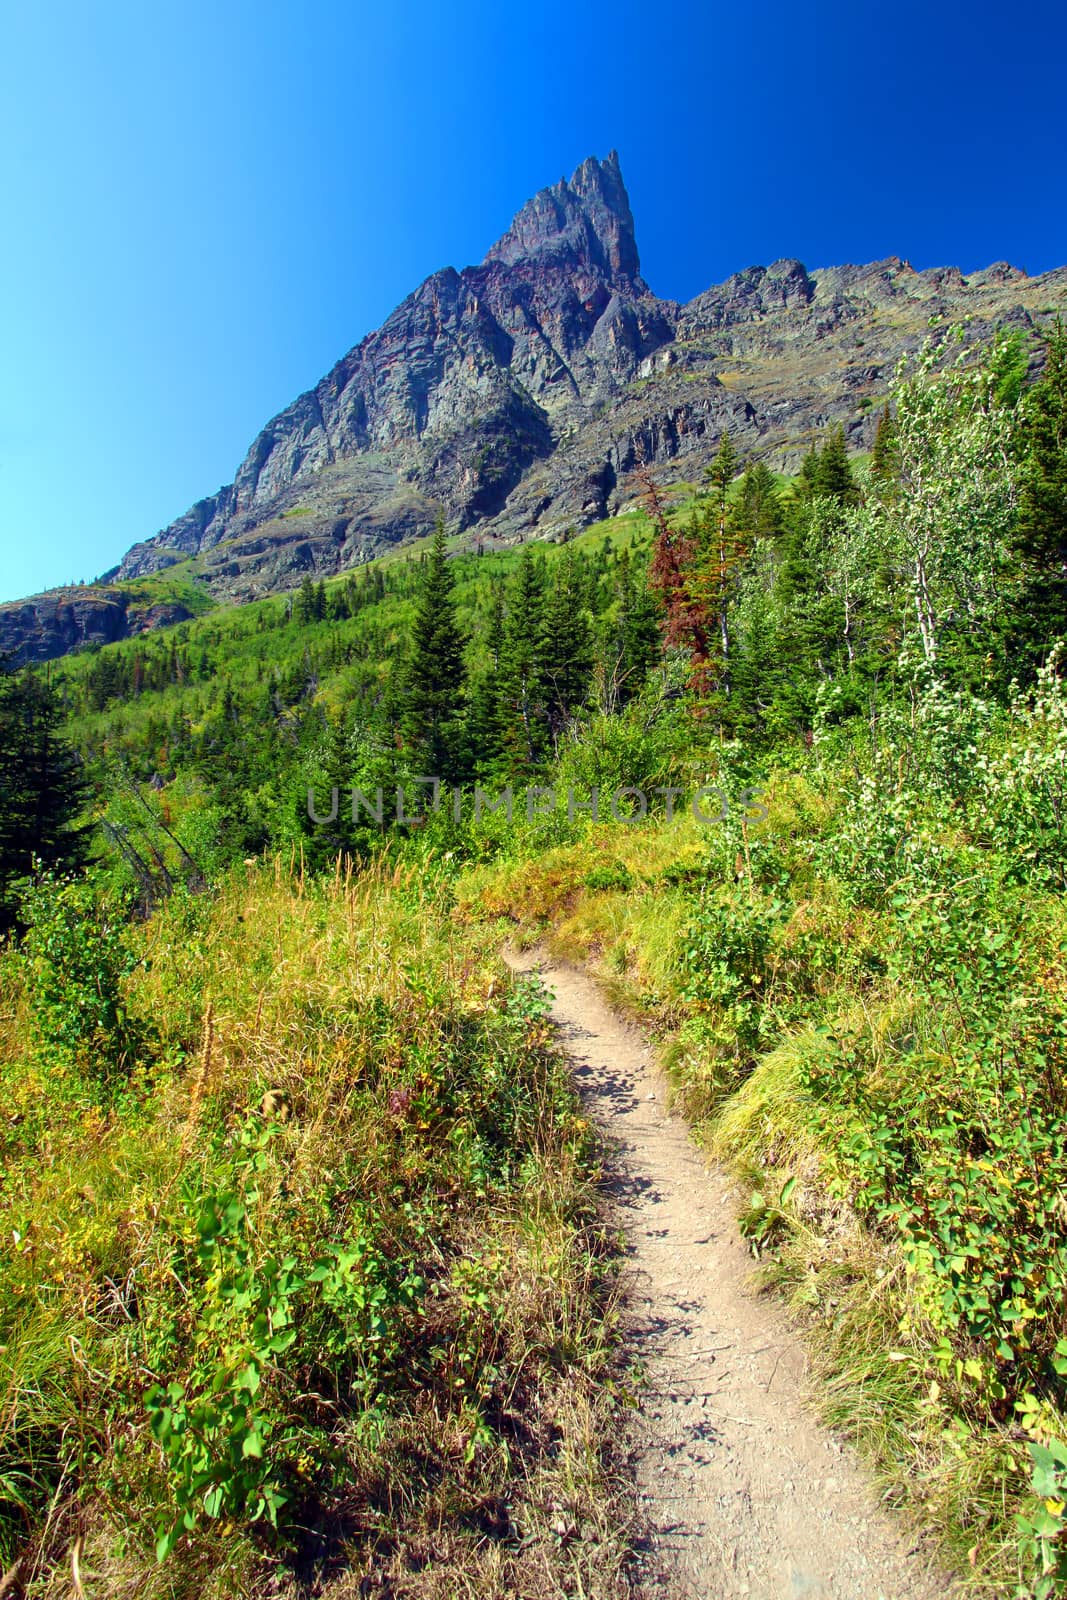 Hiking trail in the Many Glacier area of Glacier National Park.